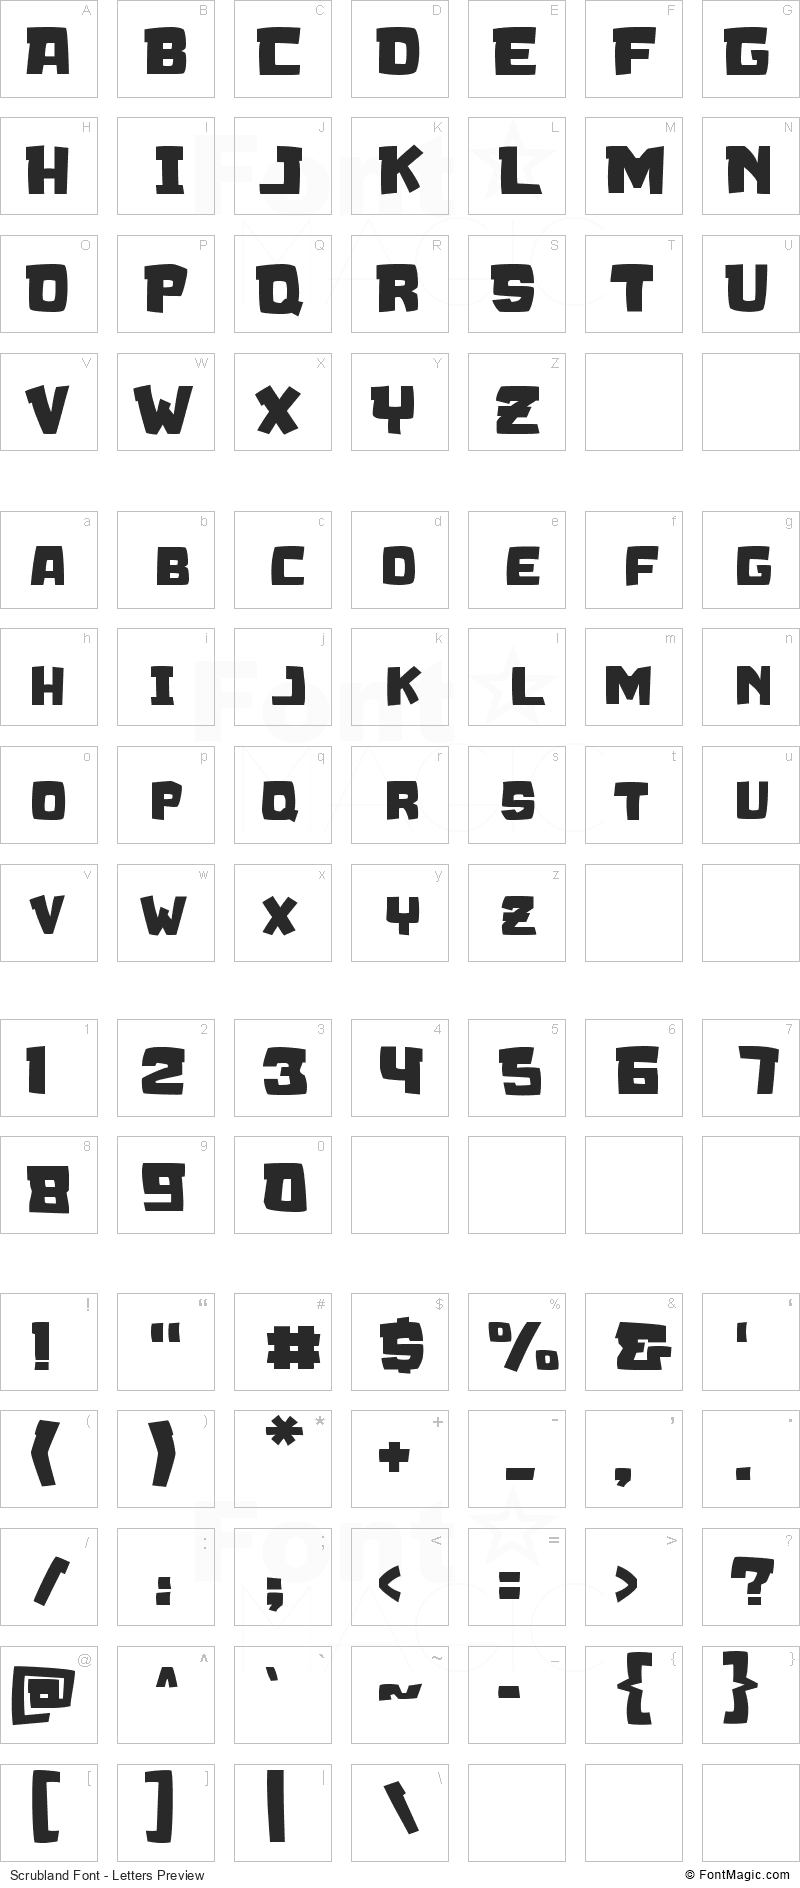 Scrubland Font - All Latters Preview Chart